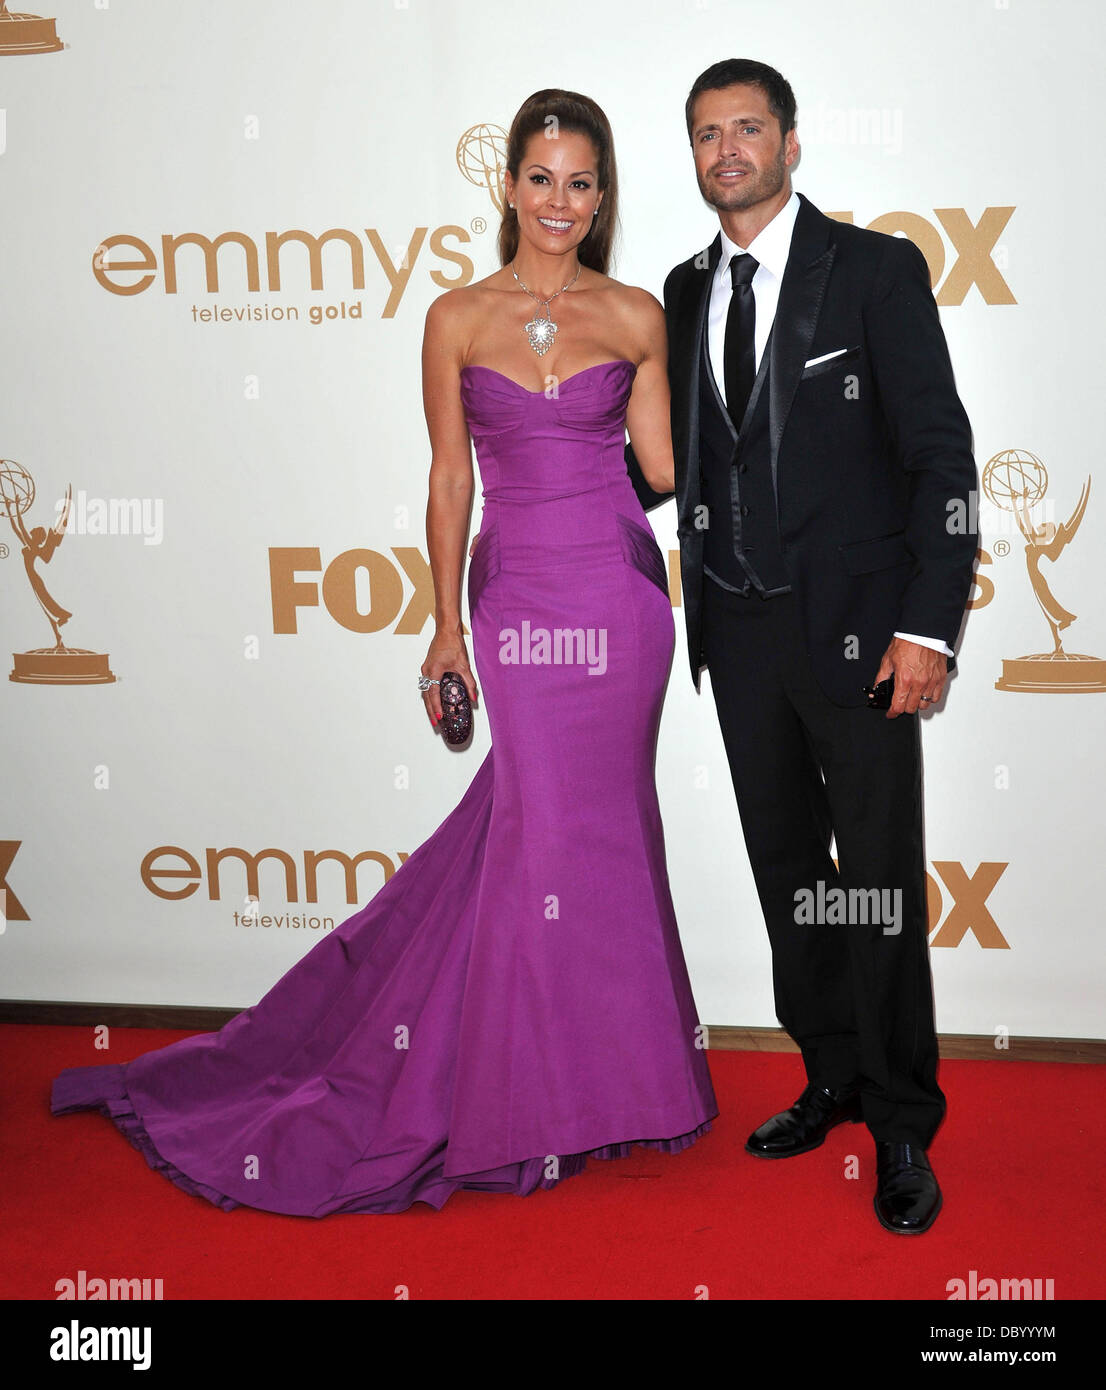 Brooke Burke and David Charvet The 63rd Primetime Emmy Awards, held at Nokia Theatre L.A. LIVE - Arrivals. Los Angeles, California - 18.09.11 Stock Photo